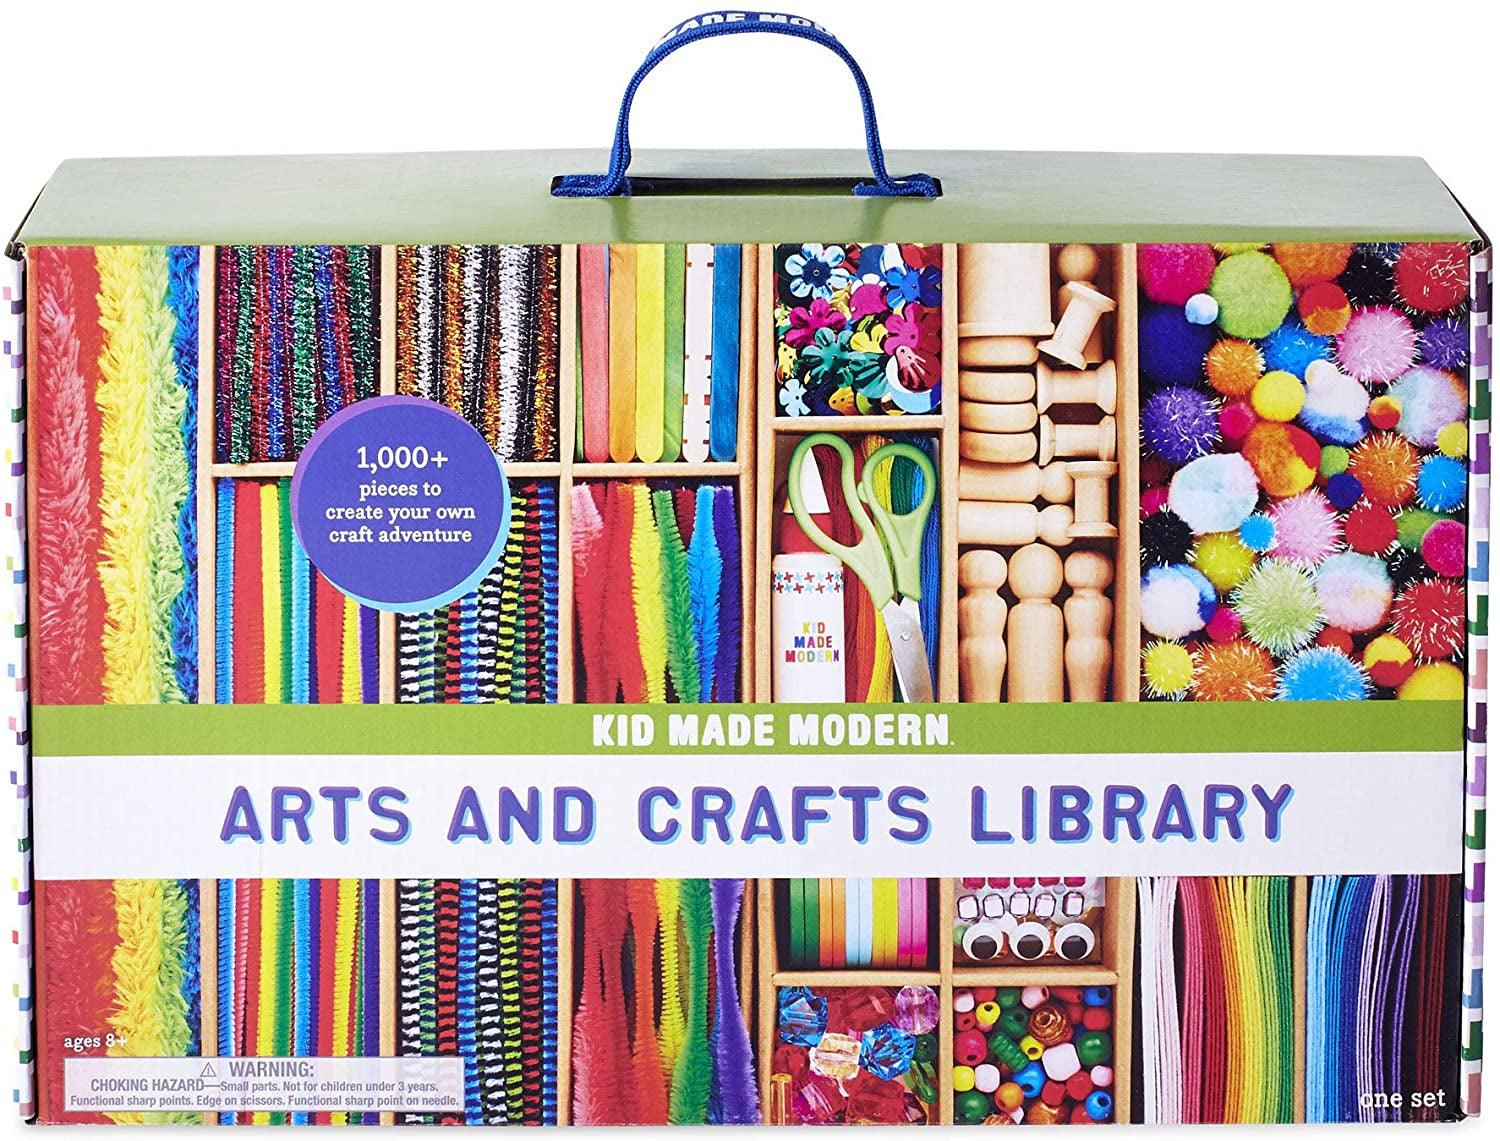 http://woodartsupply.com/cdn/shop/files/arts-and-crafts-supply-library-craft-supplies-learning-activities-kids-brain-boosting-crafting-kit-coloring-kit-woodartsupply-1_30866cbd-cdc0-4a95-9bfe-68e457658579.jpg?v=1696140755